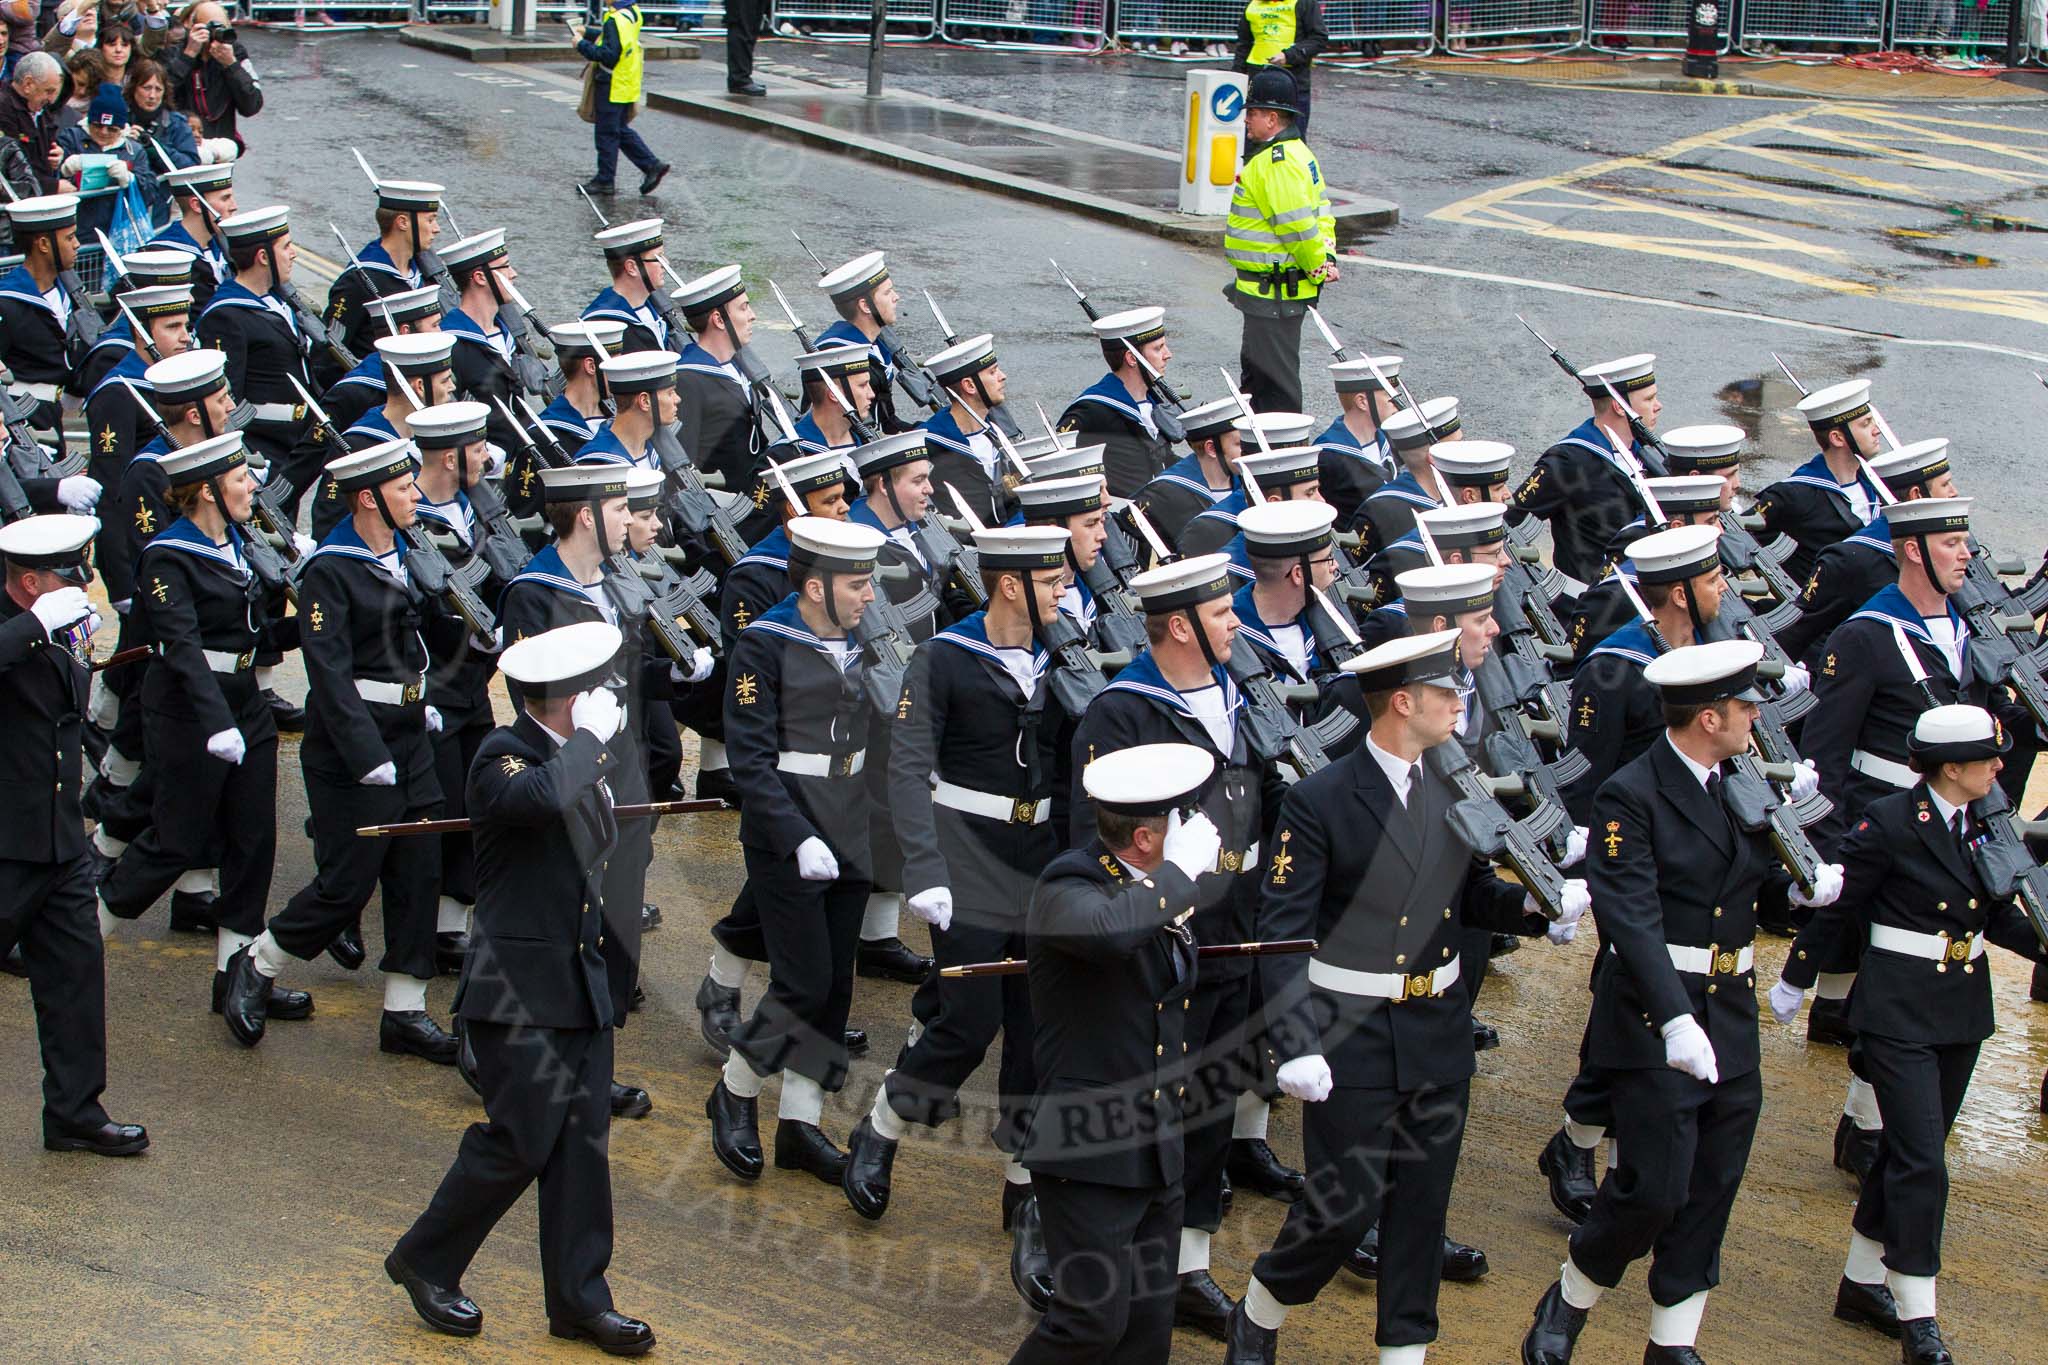 Lord Mayor's Show 2012: Entry 87 - Royal Navy (HMS Collingwood)..
Press stand opposite Mansion House, City of London,
London,
Greater London,
United Kingdom,
on 10 November 2012 at 11:38, image #1150